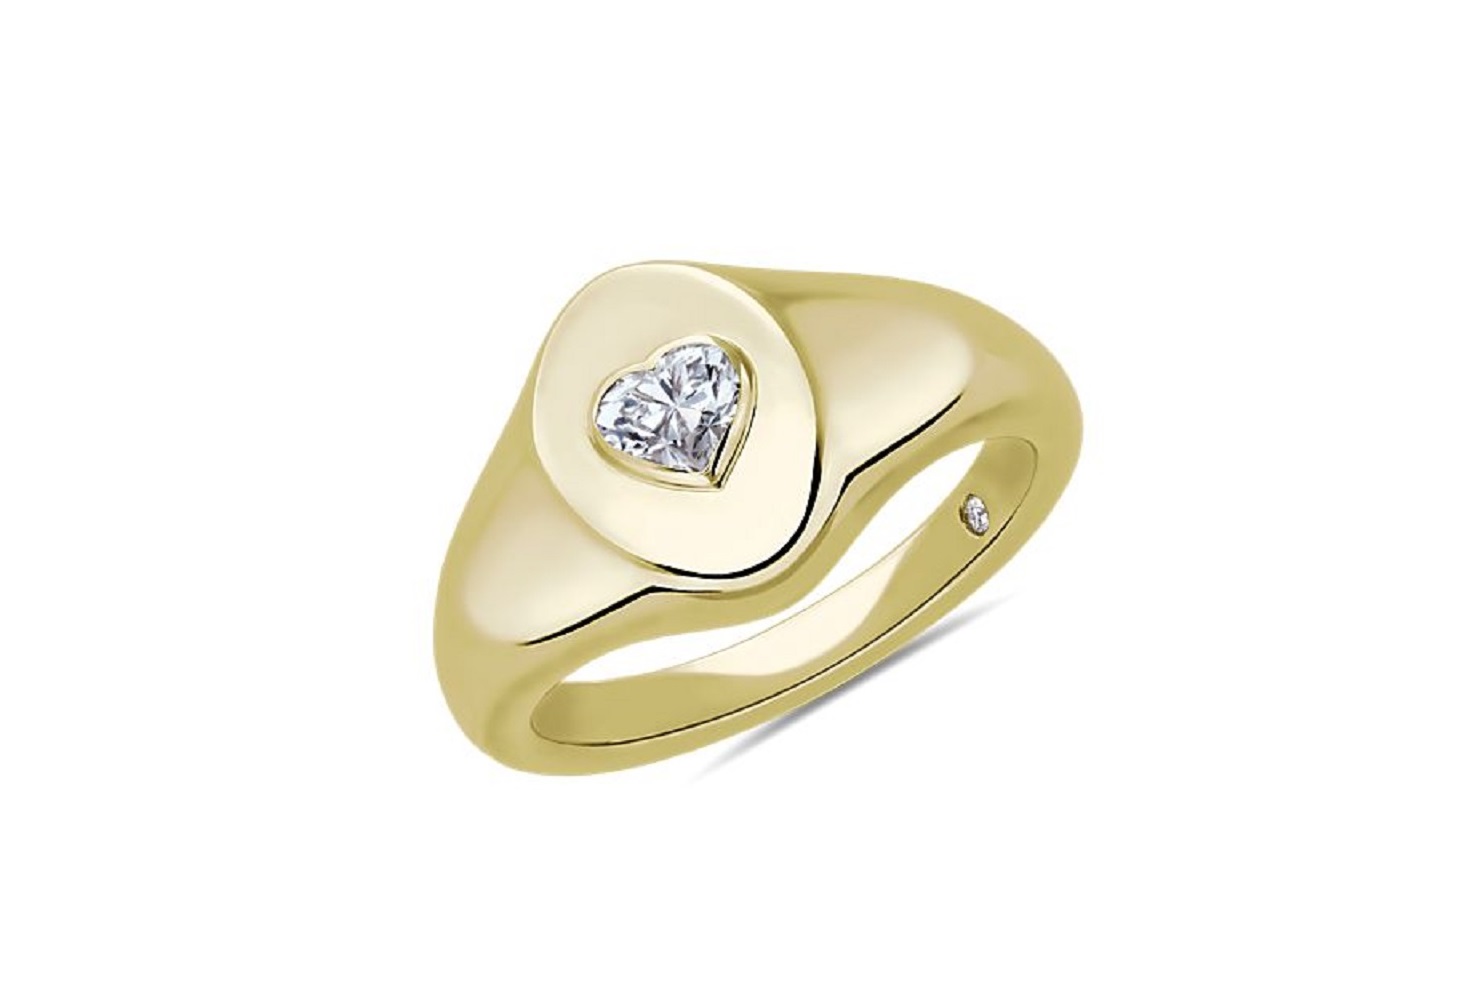 Heart-shaped diamond signet ring in yellow gold.